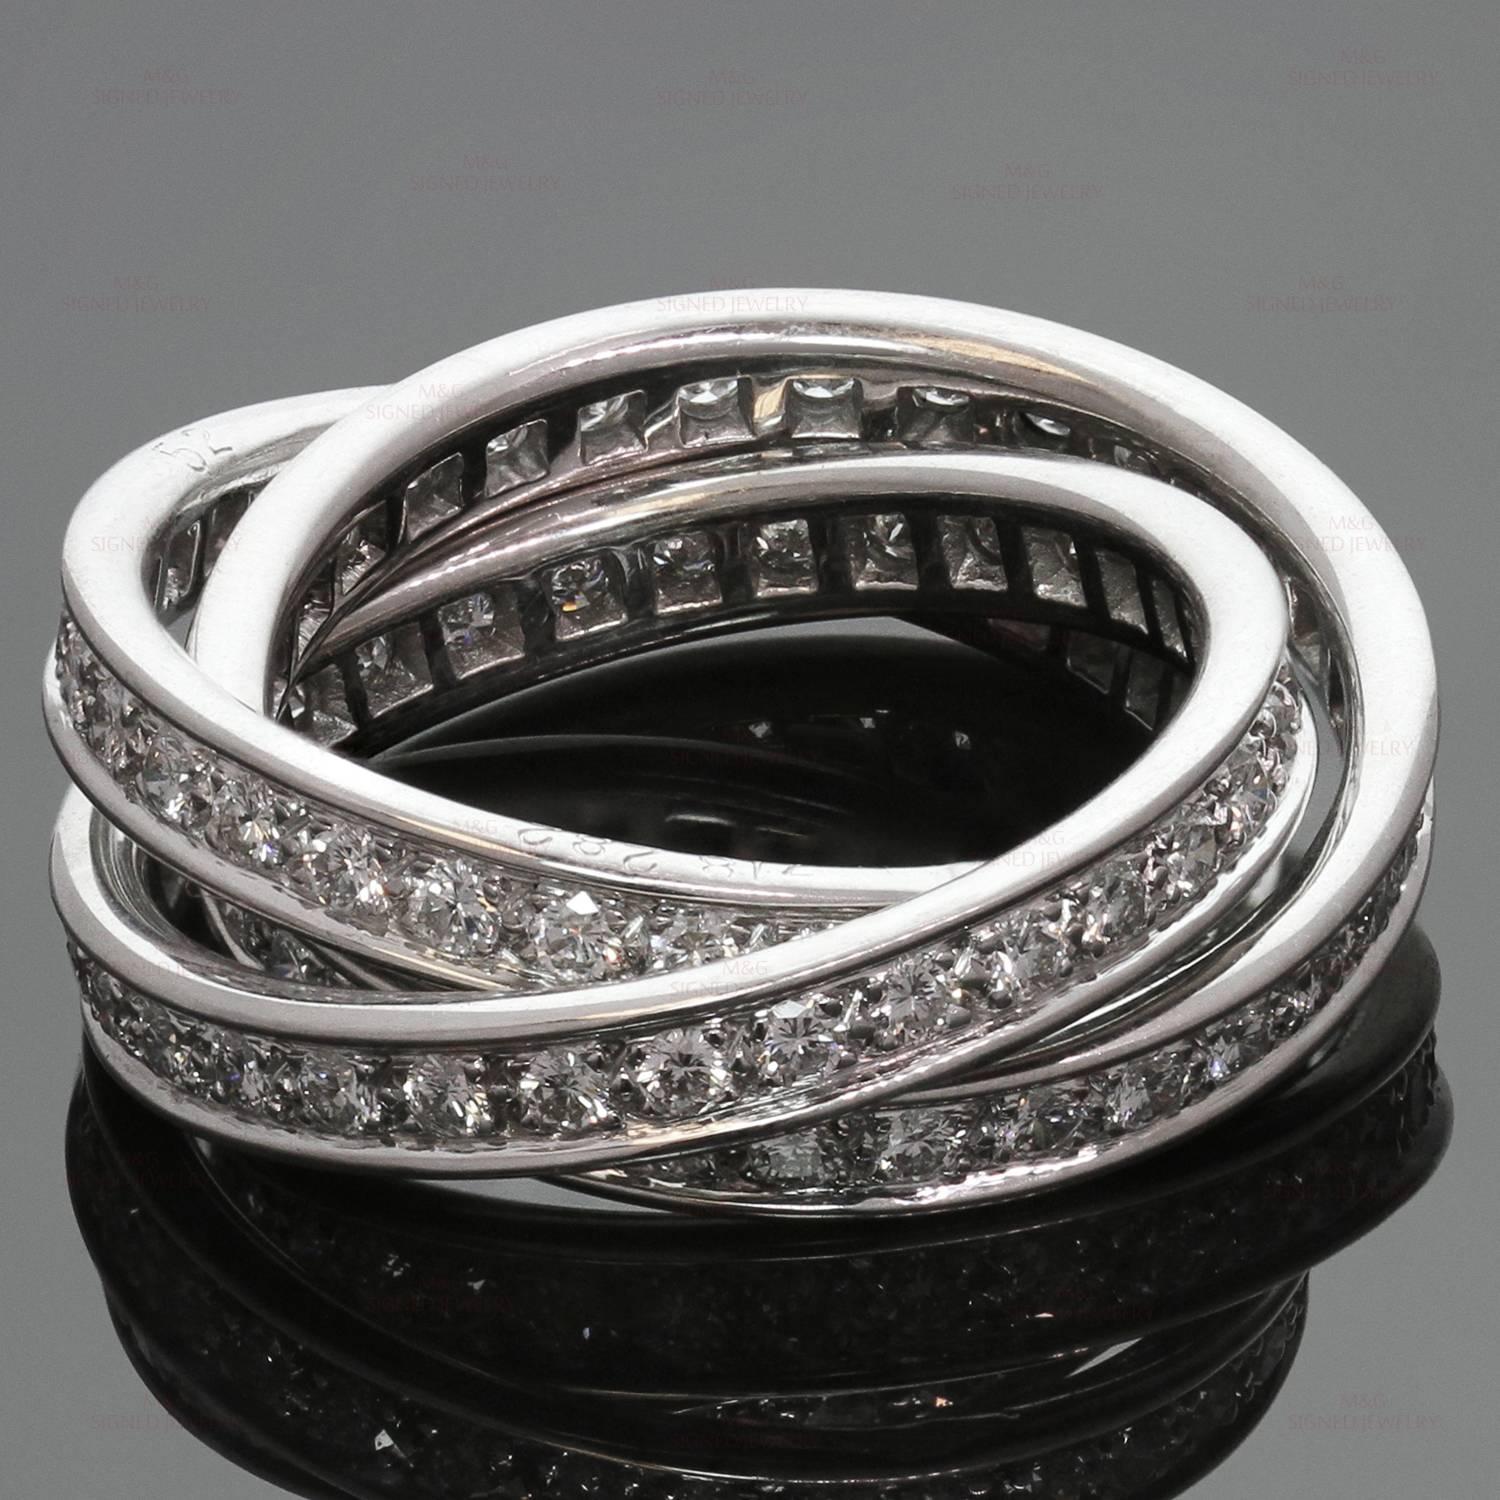 This iconic ring from Trinity de Cartier collection features 3 interconnected bands in crafted 18k white gold and beautifully pave-set with brilliant-cut diamonds of an estimated 1.55 carats. A classic and elegant design made in France circa 2000s.